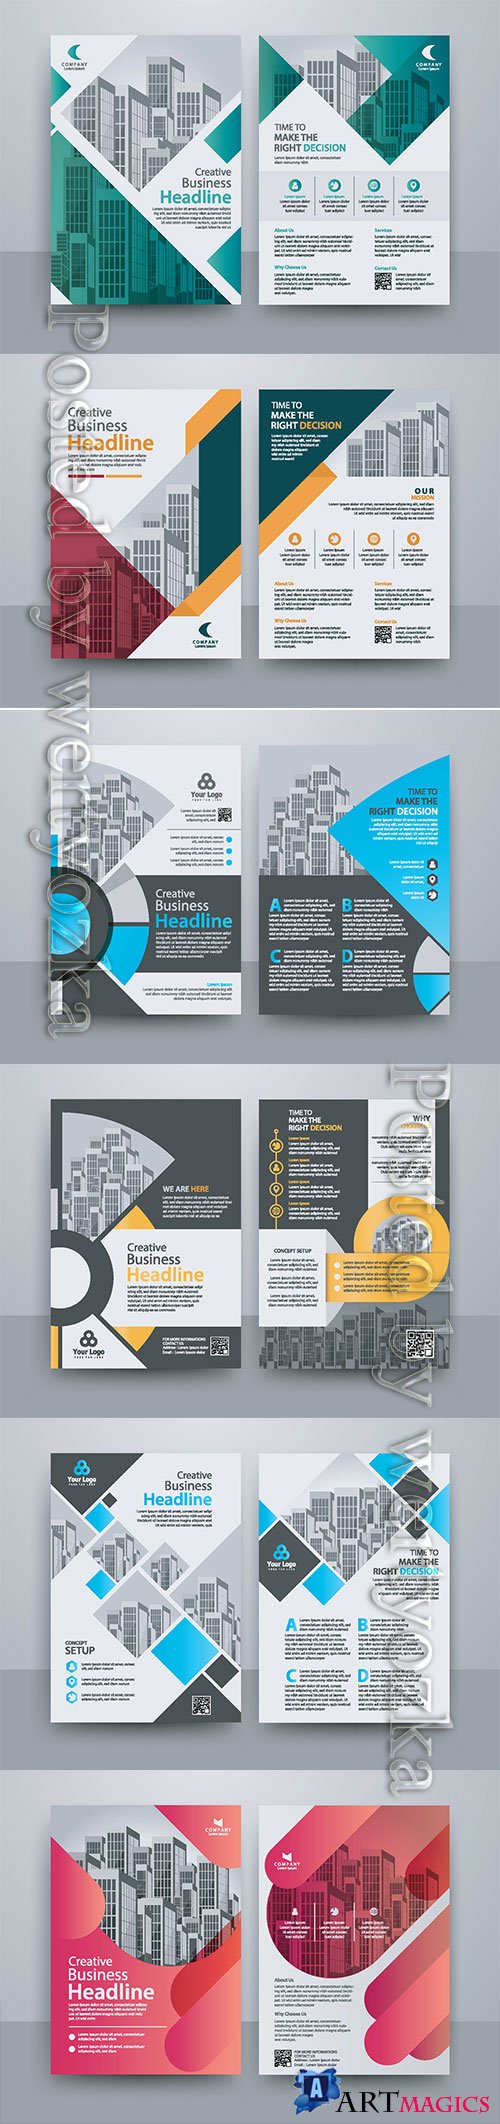 Business vector template for brochure, annual report, magazine # 10